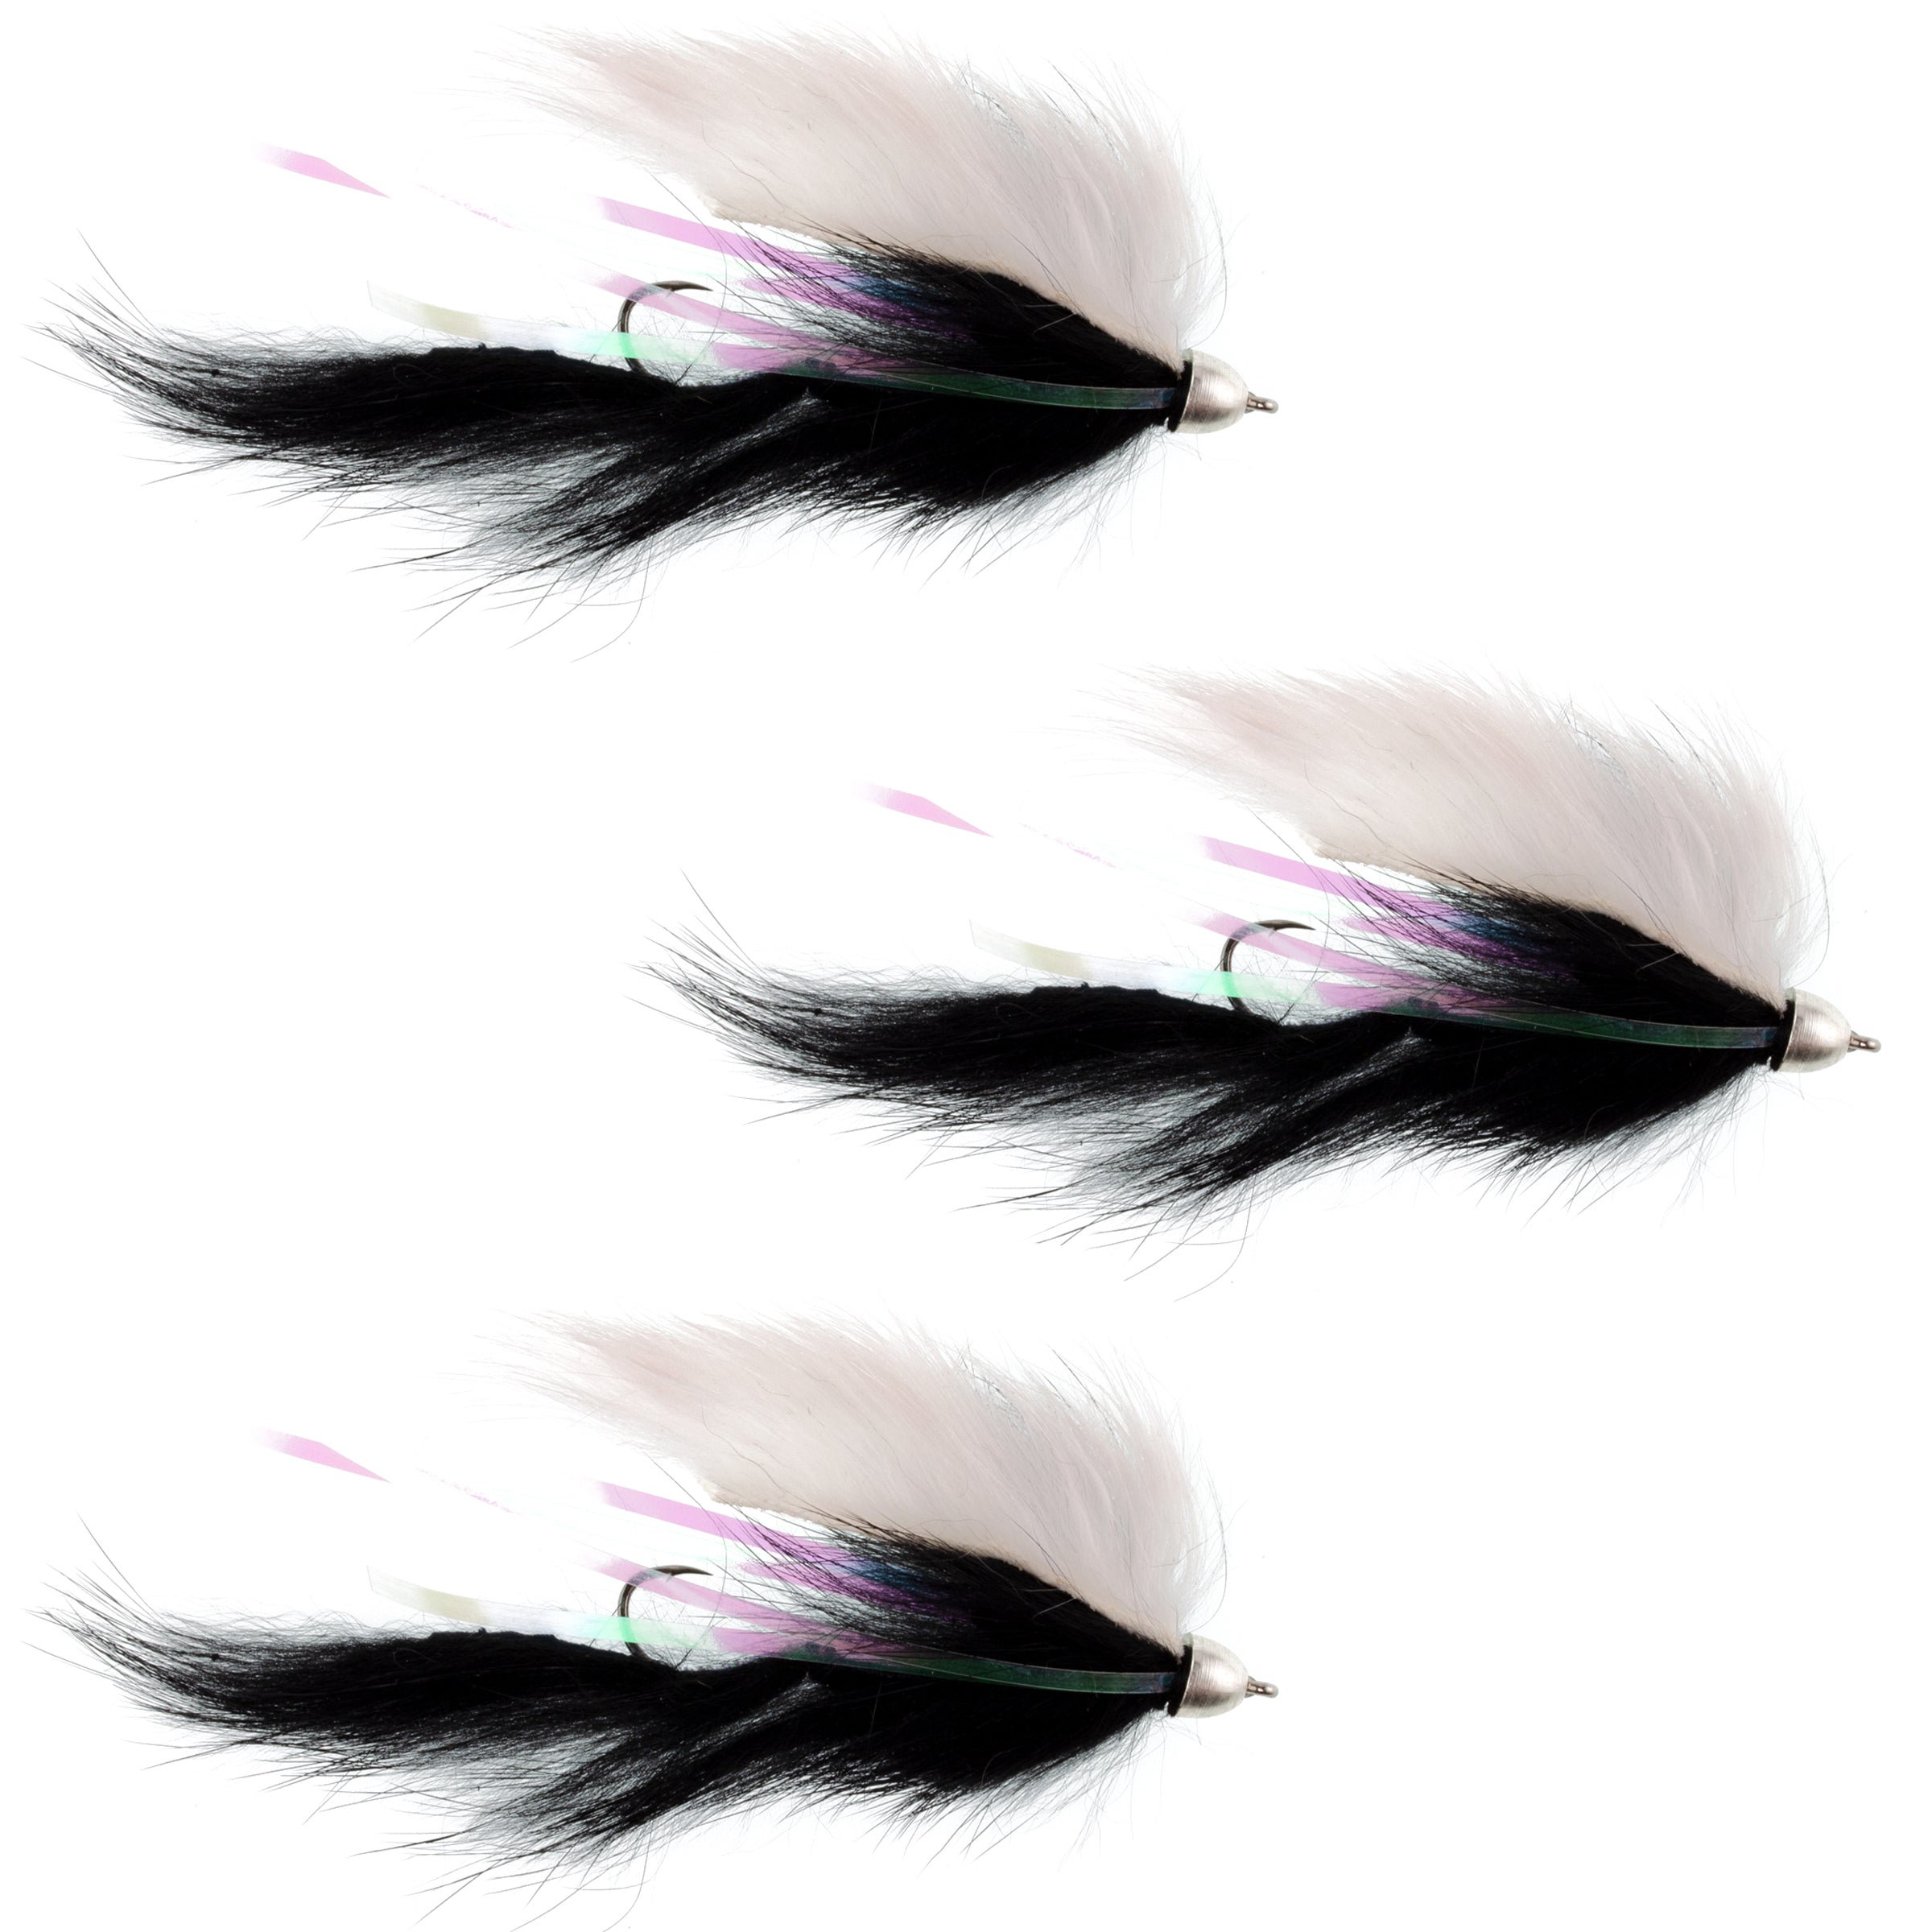 The Fly Fishing Place Dolly Llama Stinger Streamer Flies - 3 Black and White Salmon Steelhead Trout Alaska Fly Fishing Flies - Hook Size 4